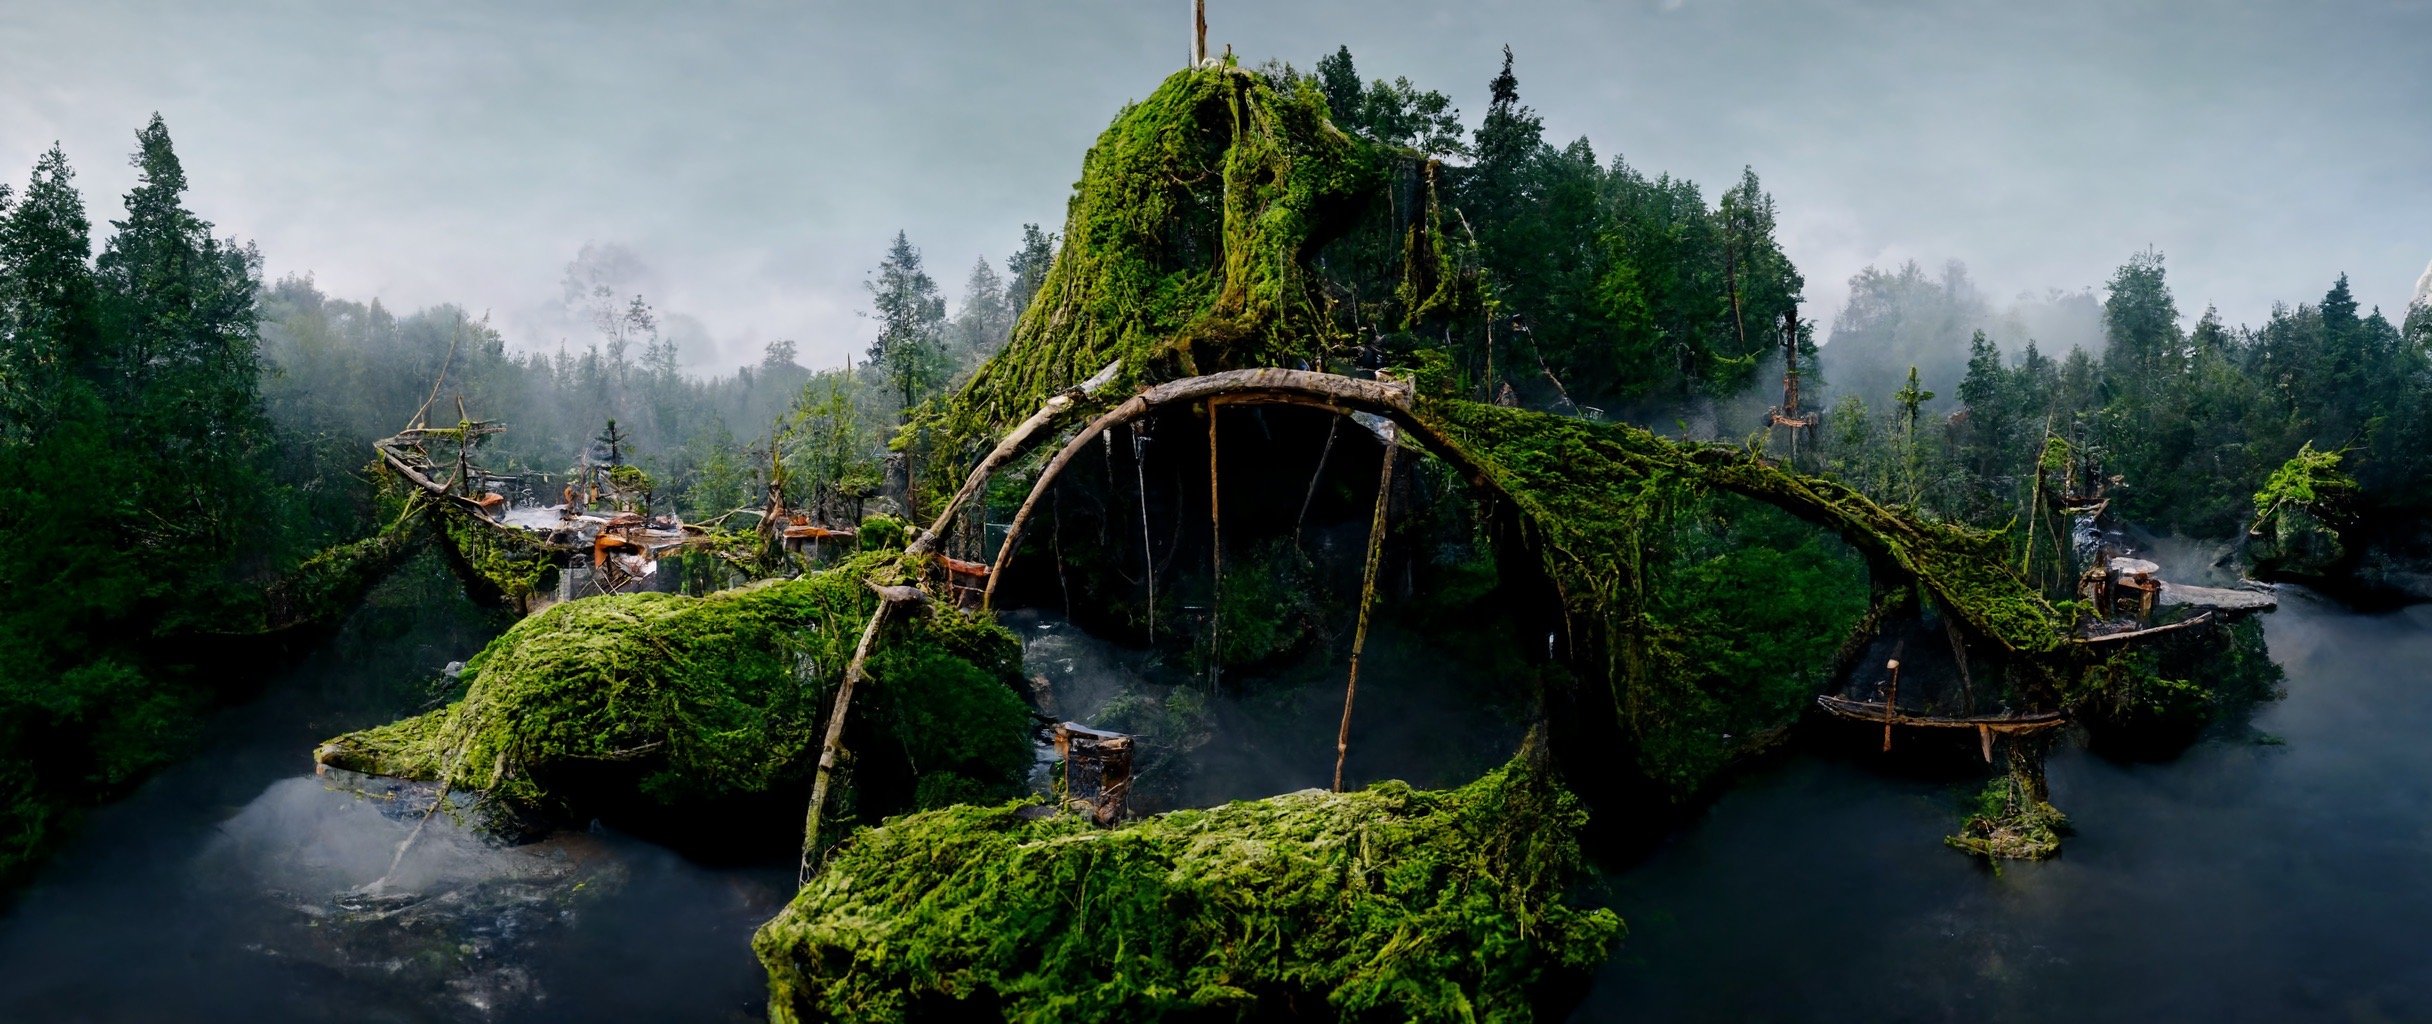 ee0f61c9-eff0-4f84-8c02-eec603d2b720_S3RAPH_httpss.mj.runkc7Sd1__Ewok_style_tree_forts_and_village_in_a_massive_forest._Moss_waterfalls_and_rope.JPG